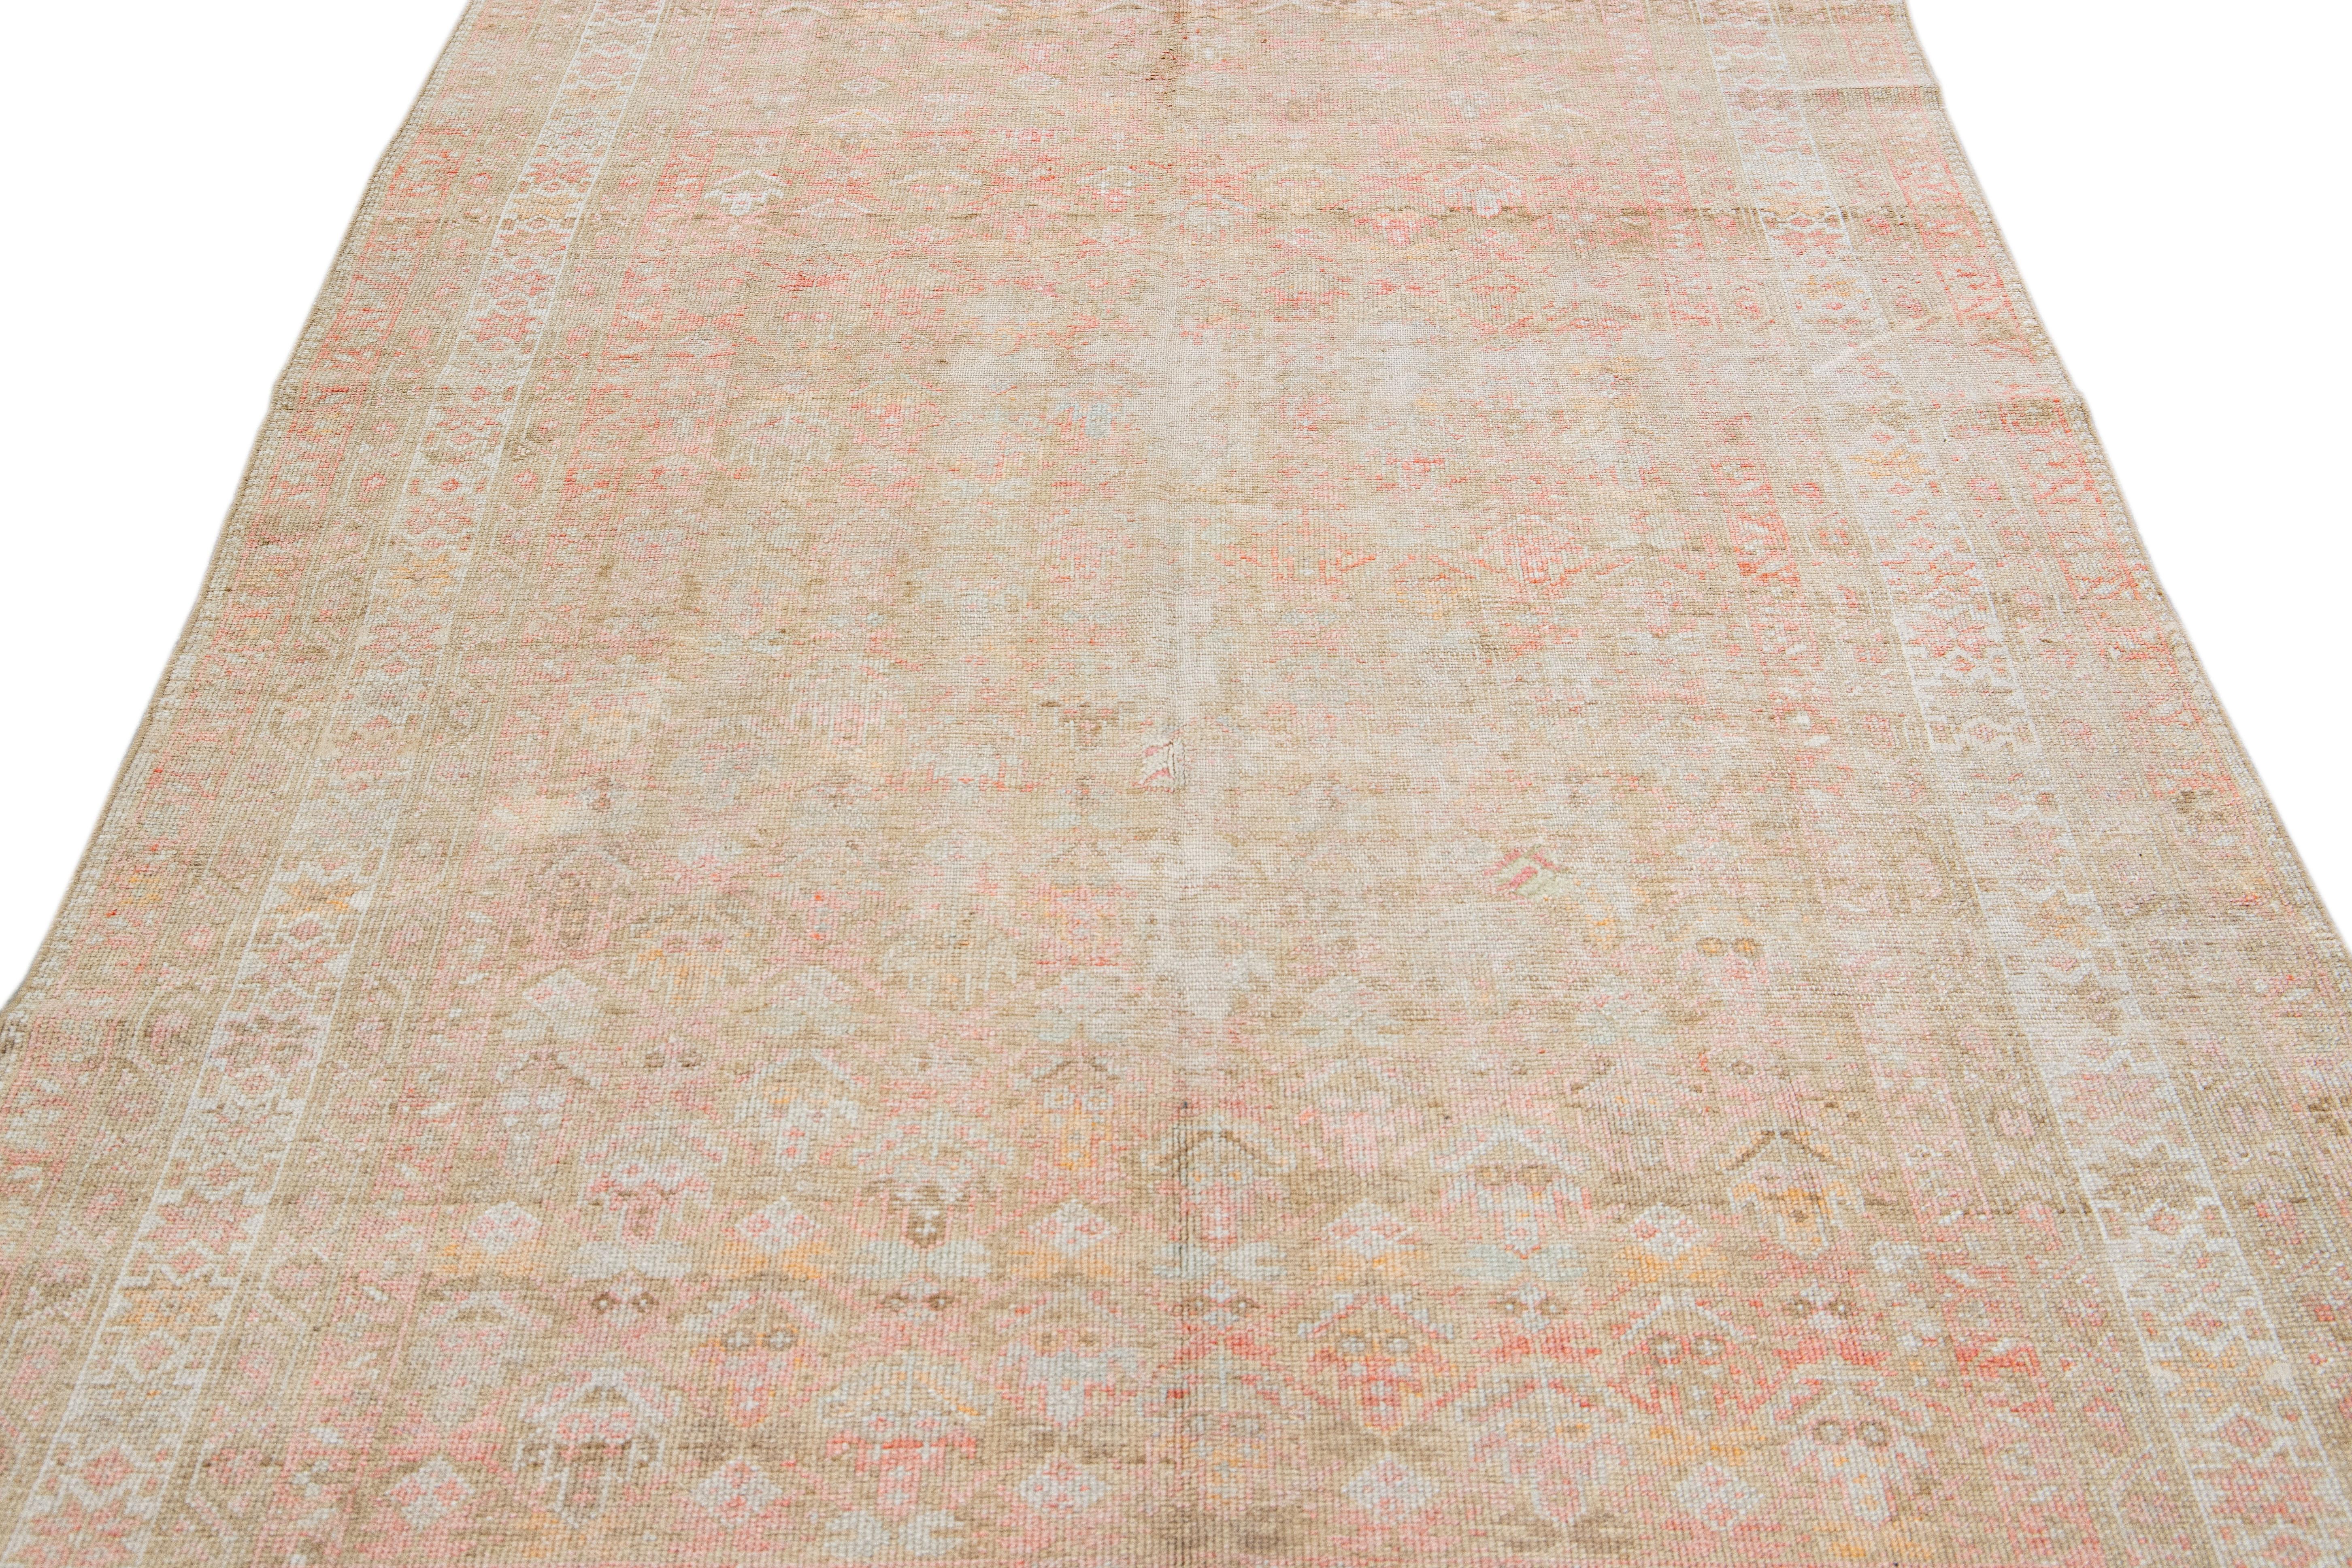 Islamic Antique Malayer Handmade Geometric Pattern Pink and Tan Scatter Wool Rug For Sale